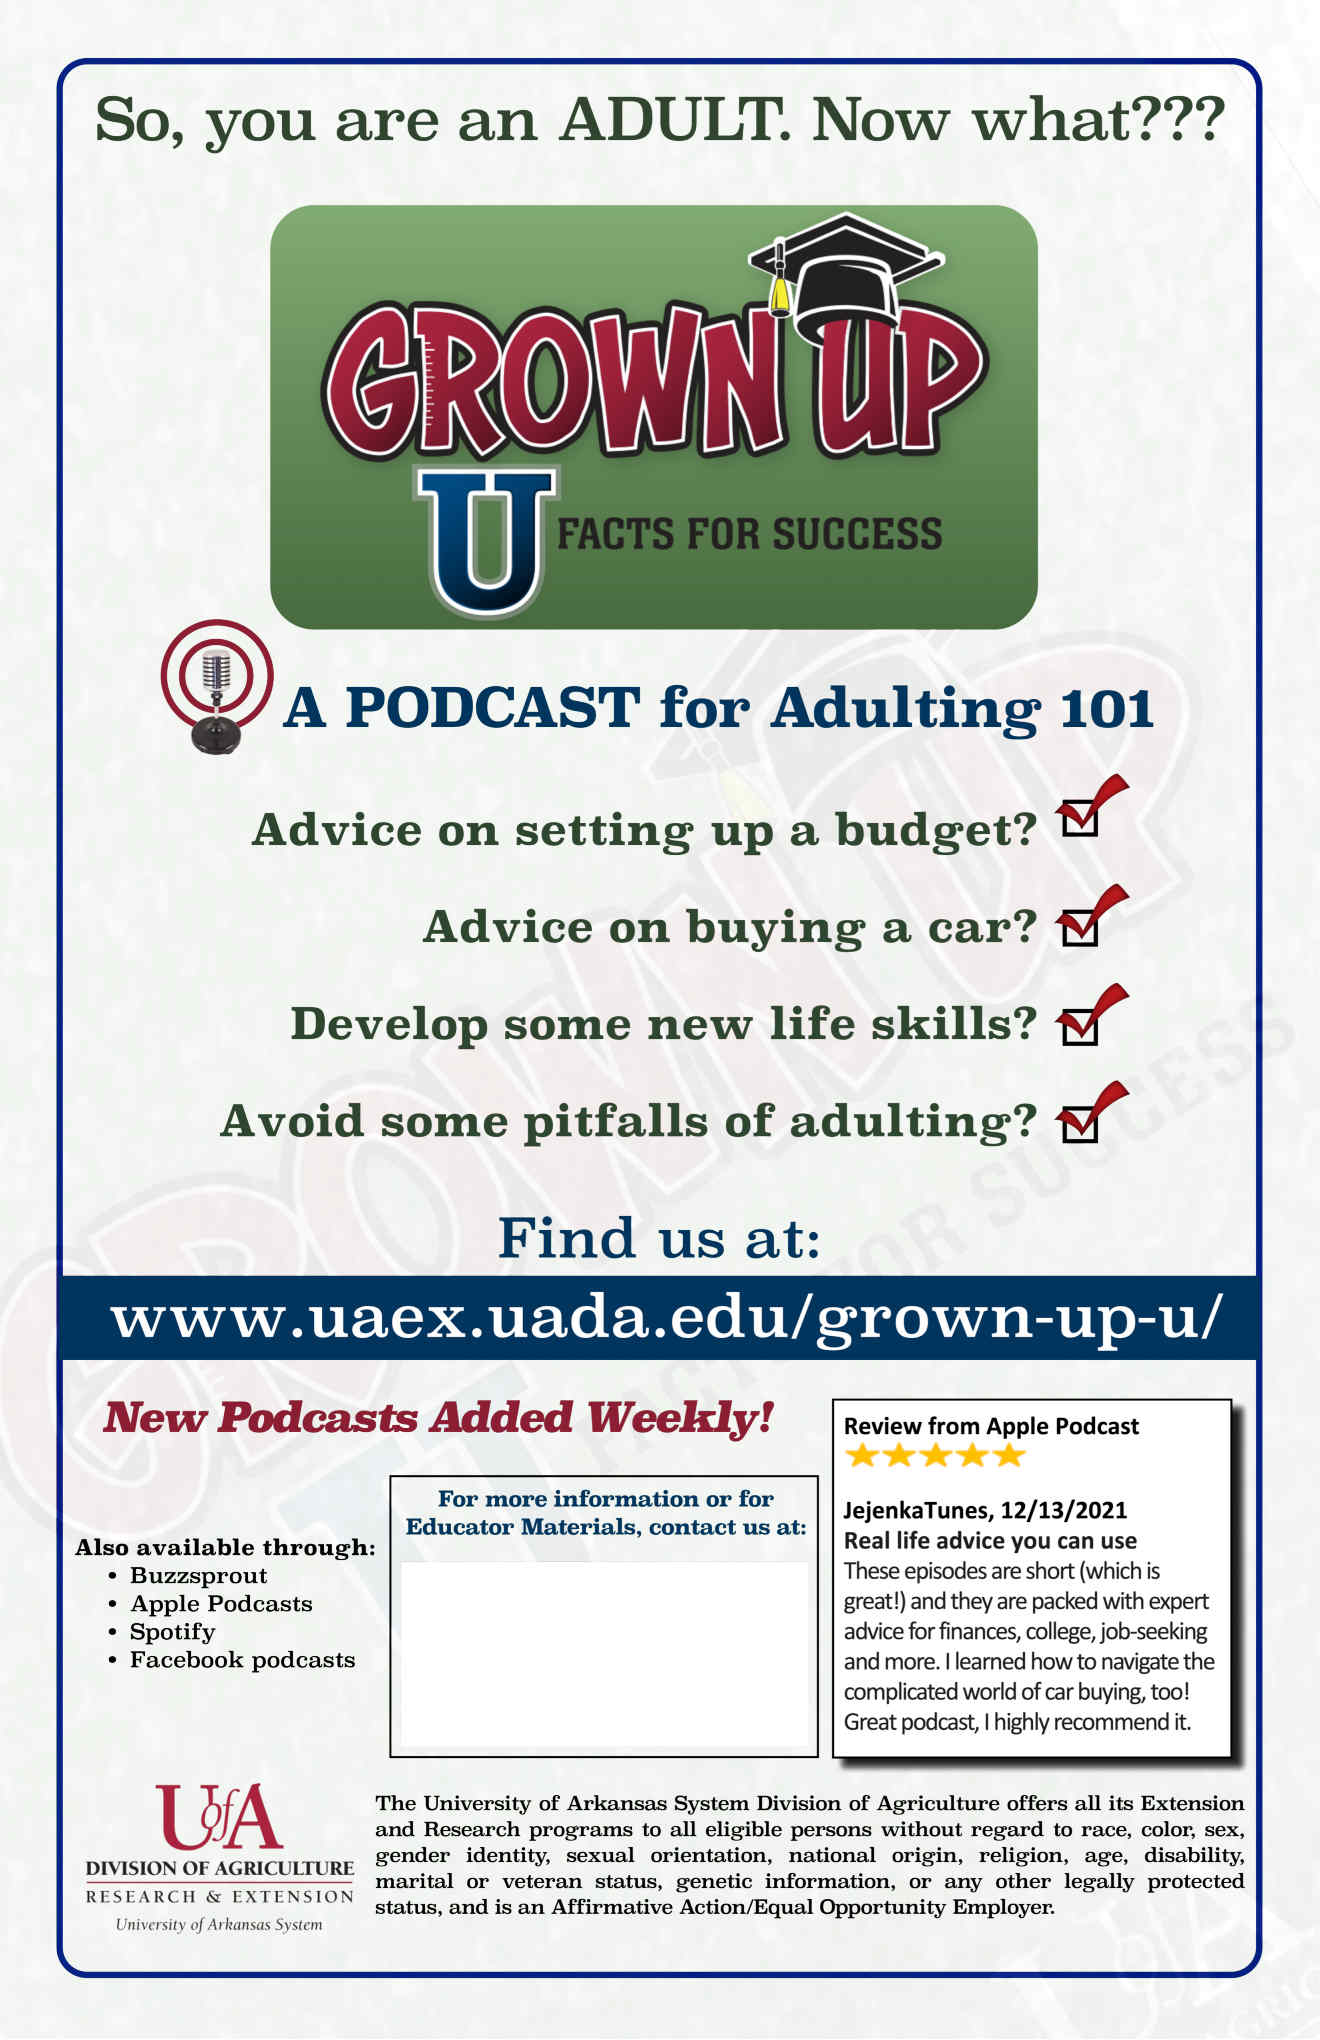 Picture of one of our sample flyers for promoting Grown Up U among youth and young adults. Includes topics that young people might have questions about and where to find the answers.